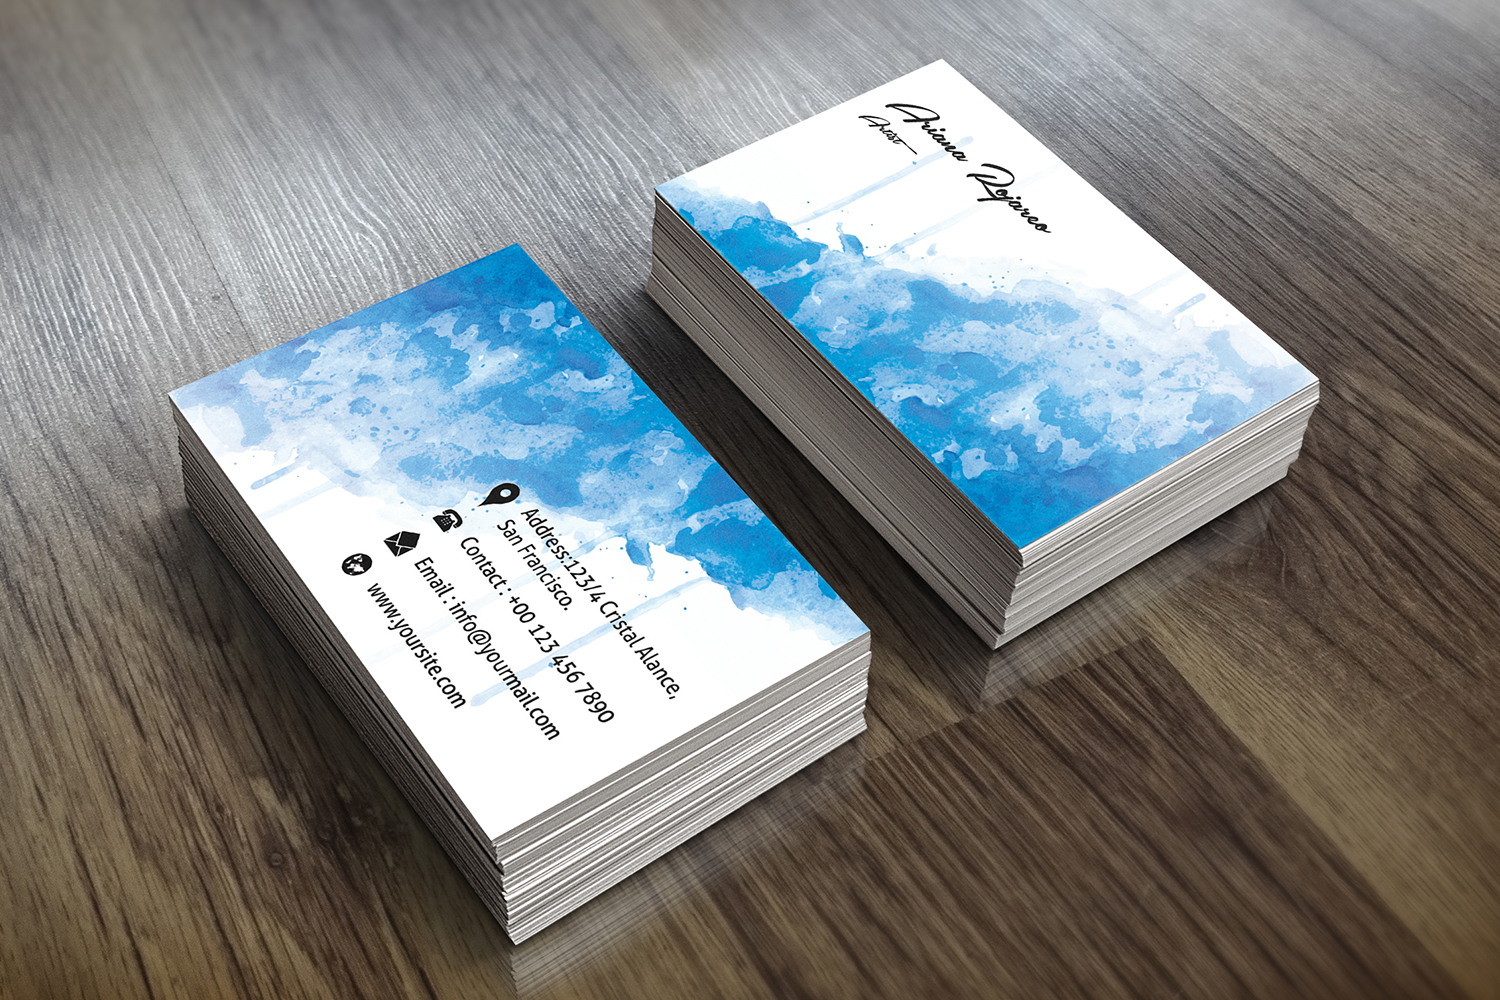 Business Card Corporate Identity Template